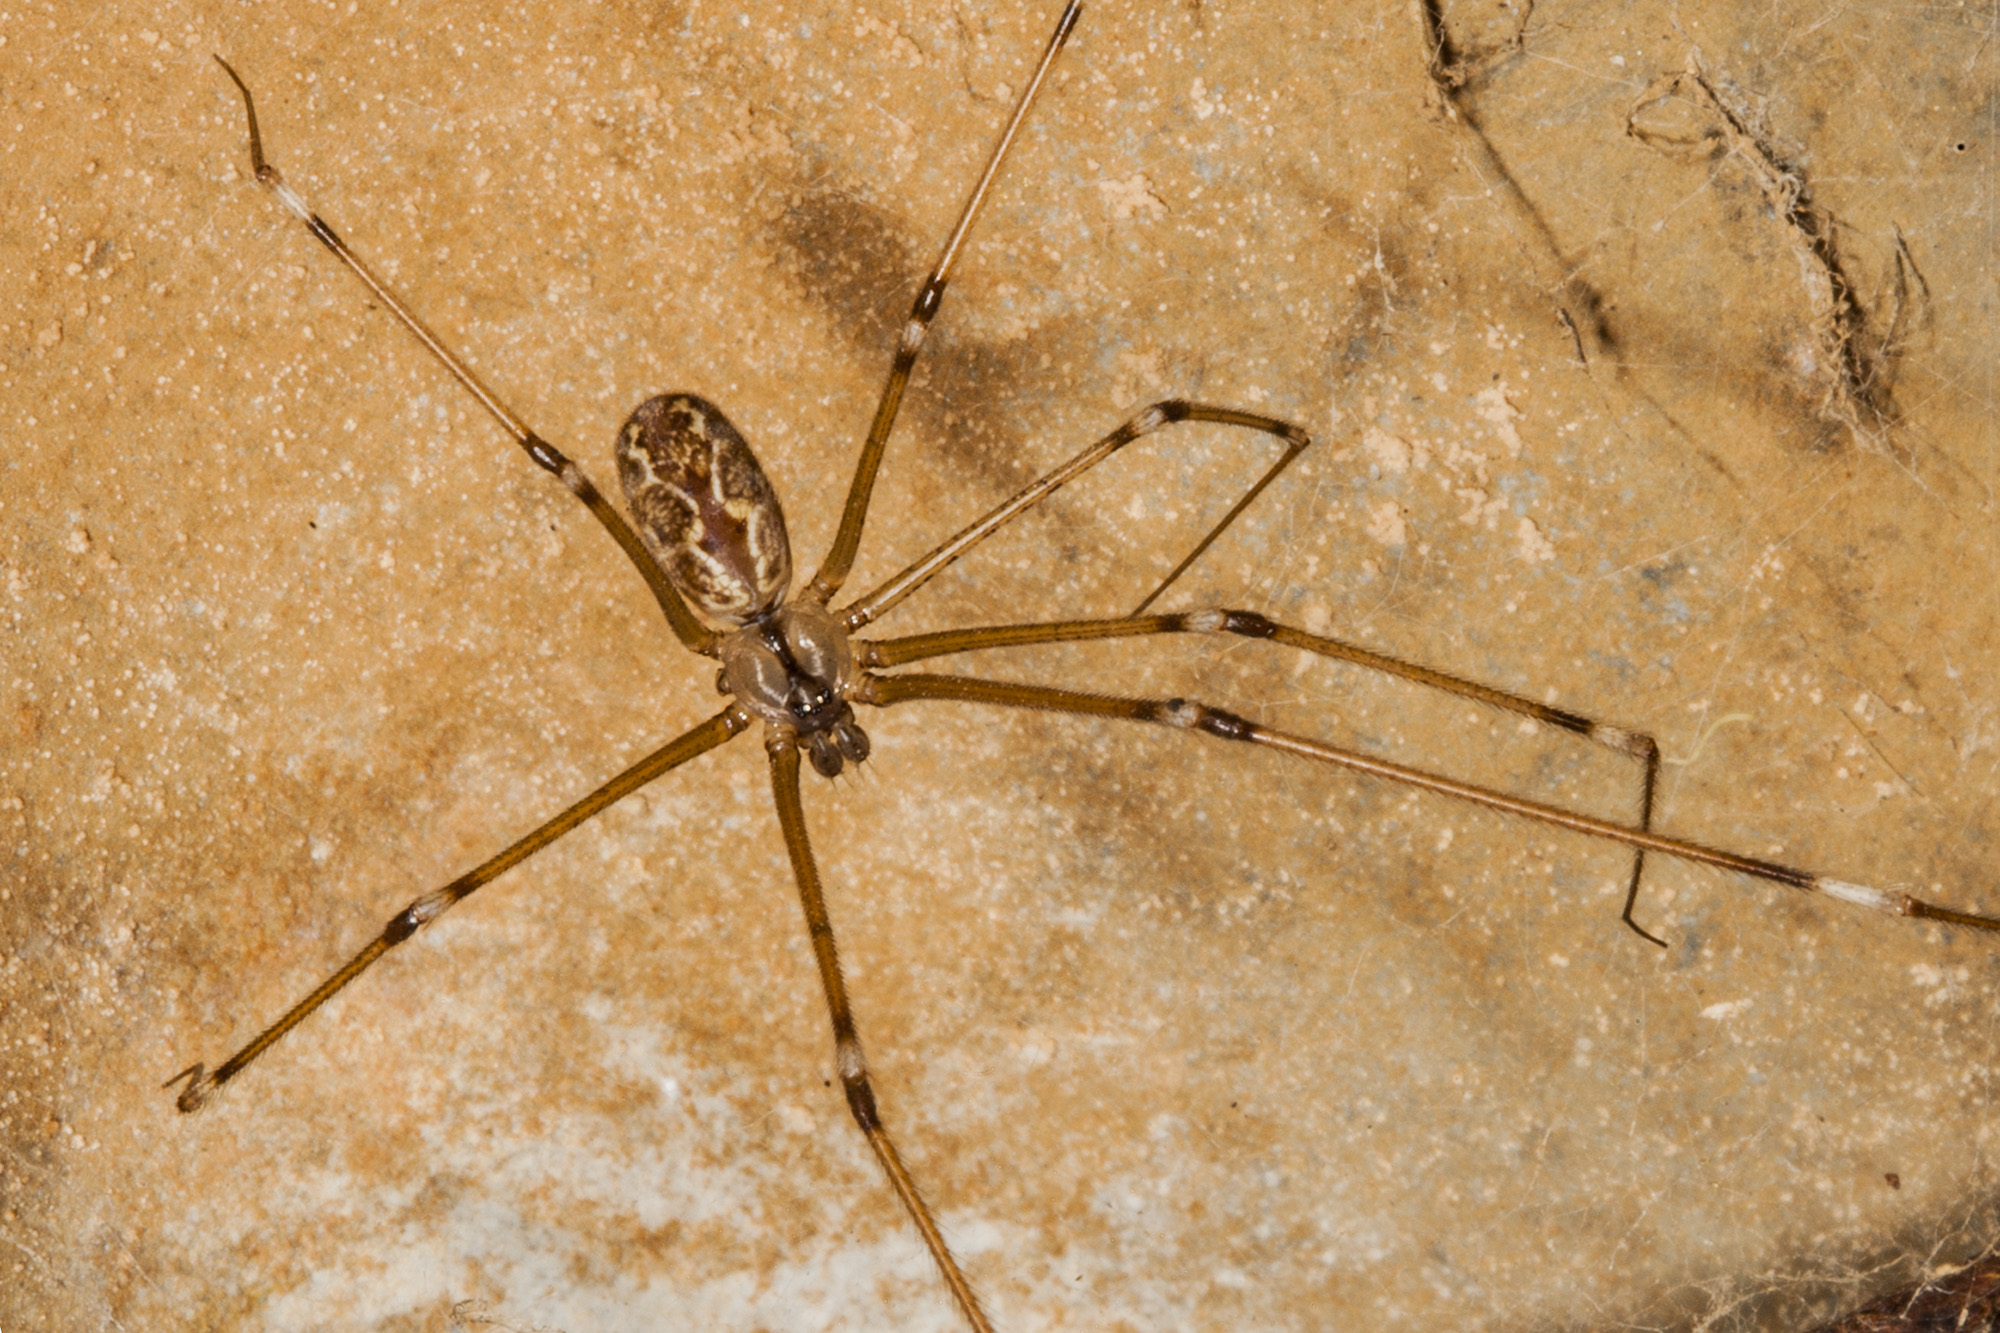 Are daddy-long-legs really the most venomous spider? Here's the